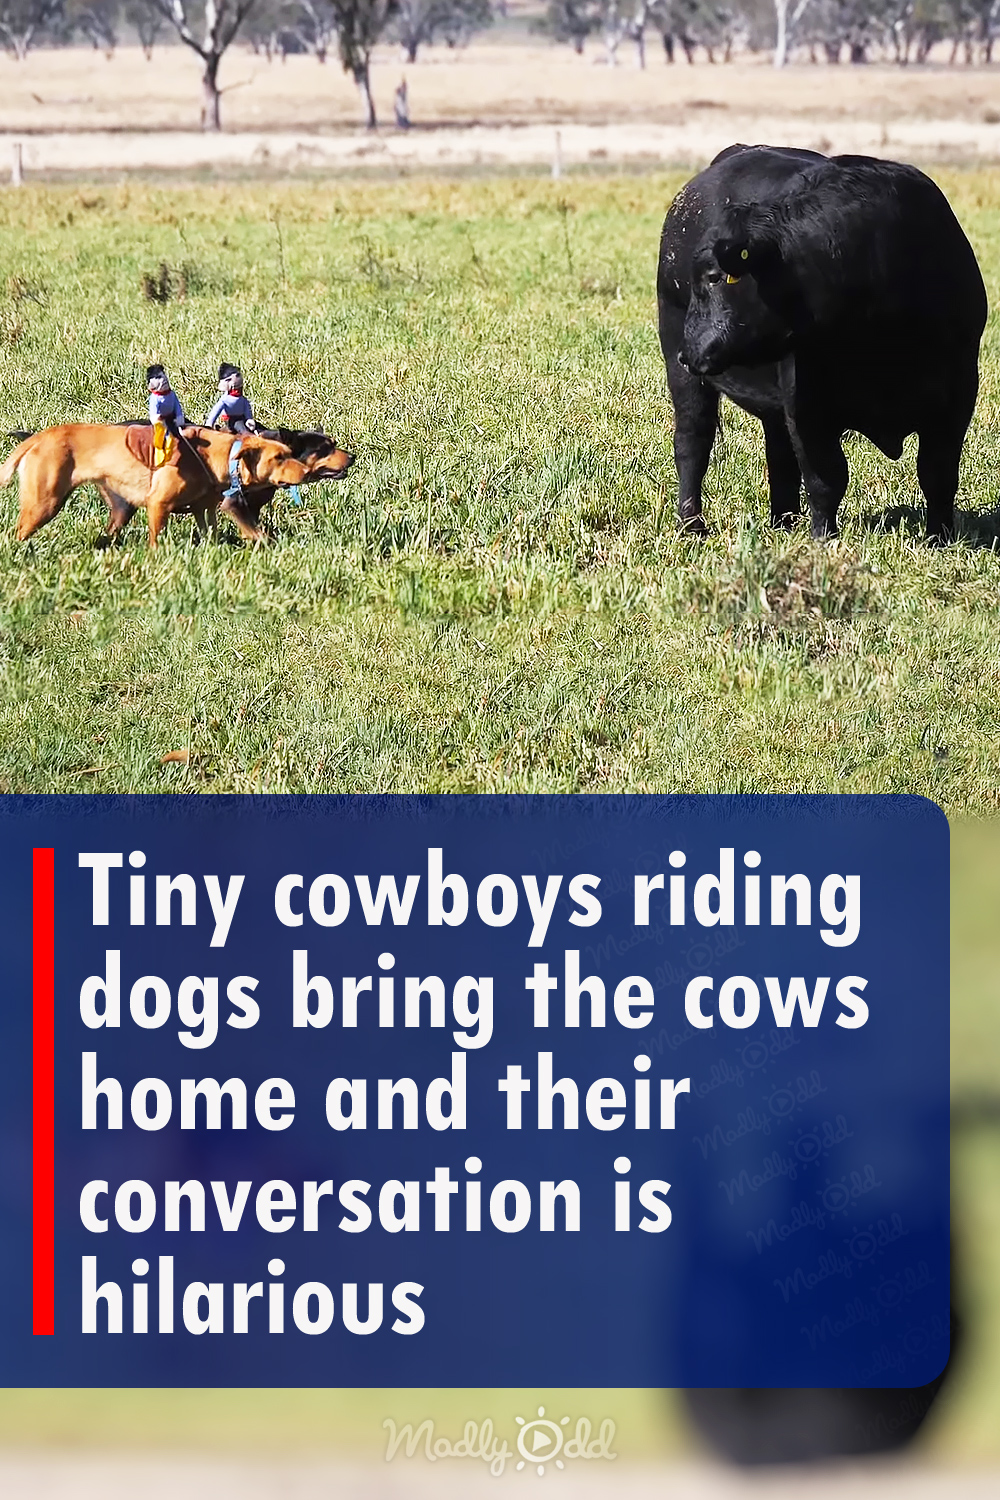 Tiny cowboys riding dogs bring the cows home and their conversation is hilarious